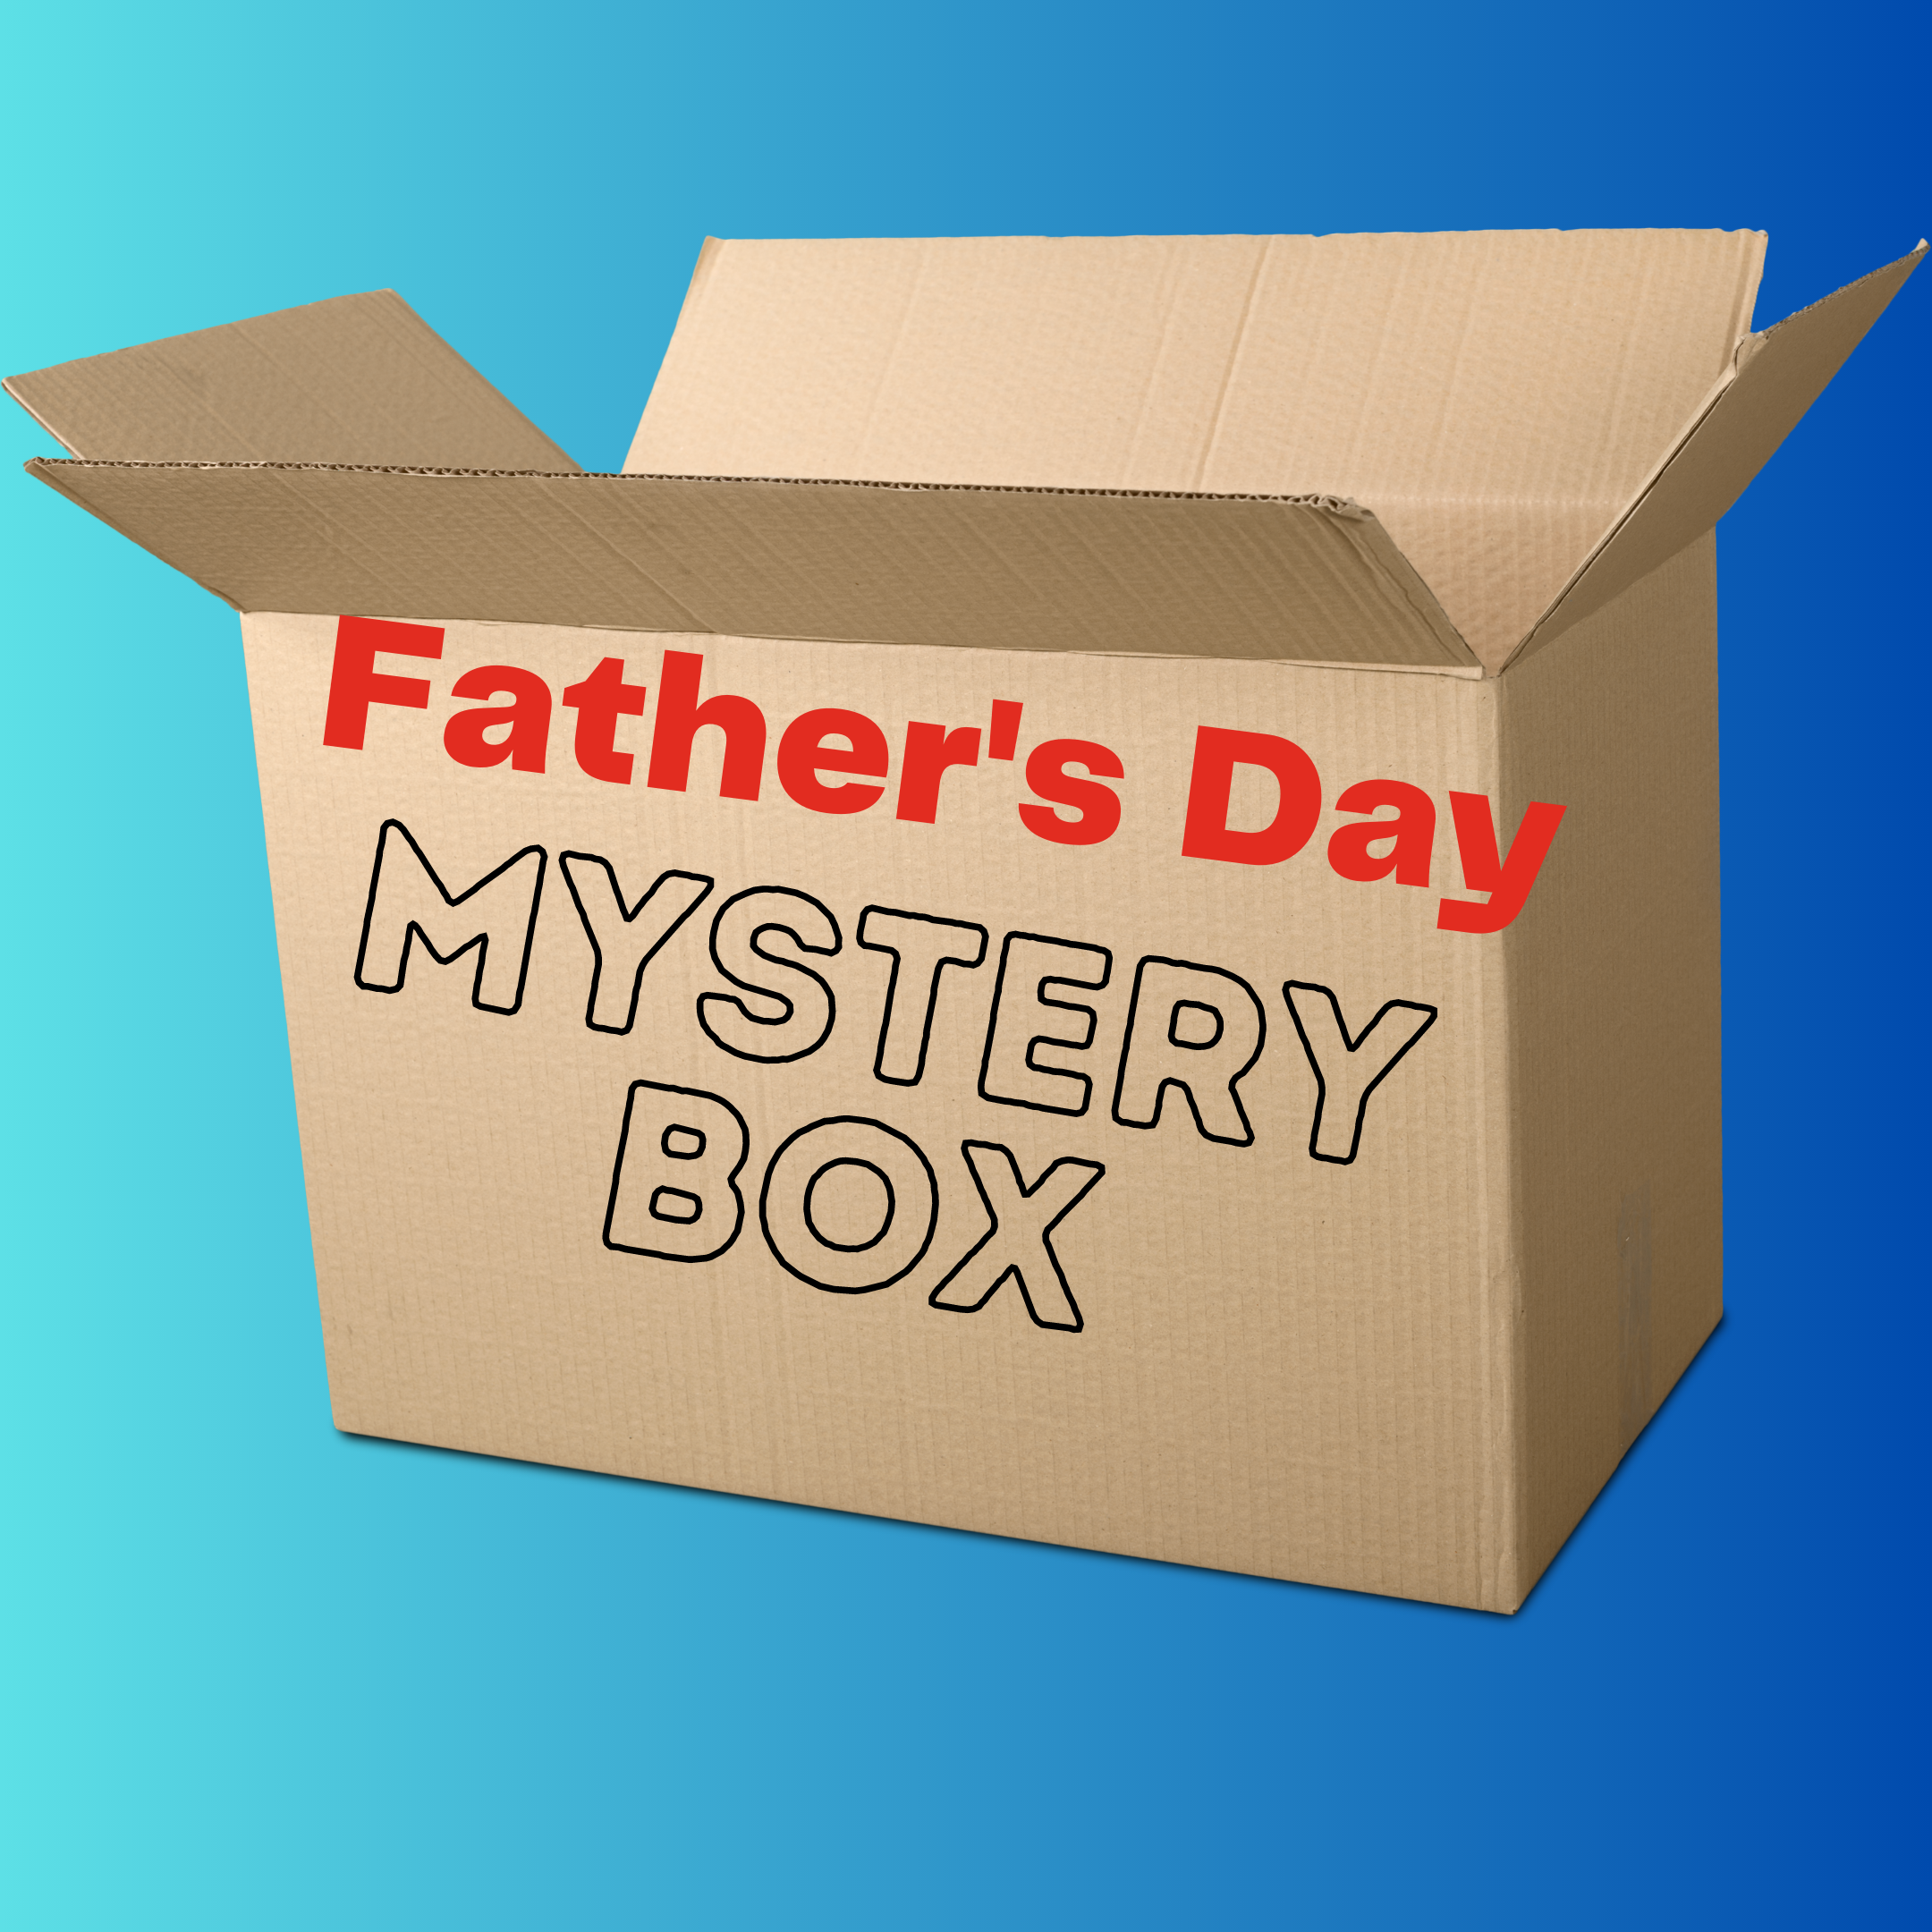 Farther's Mystery Box